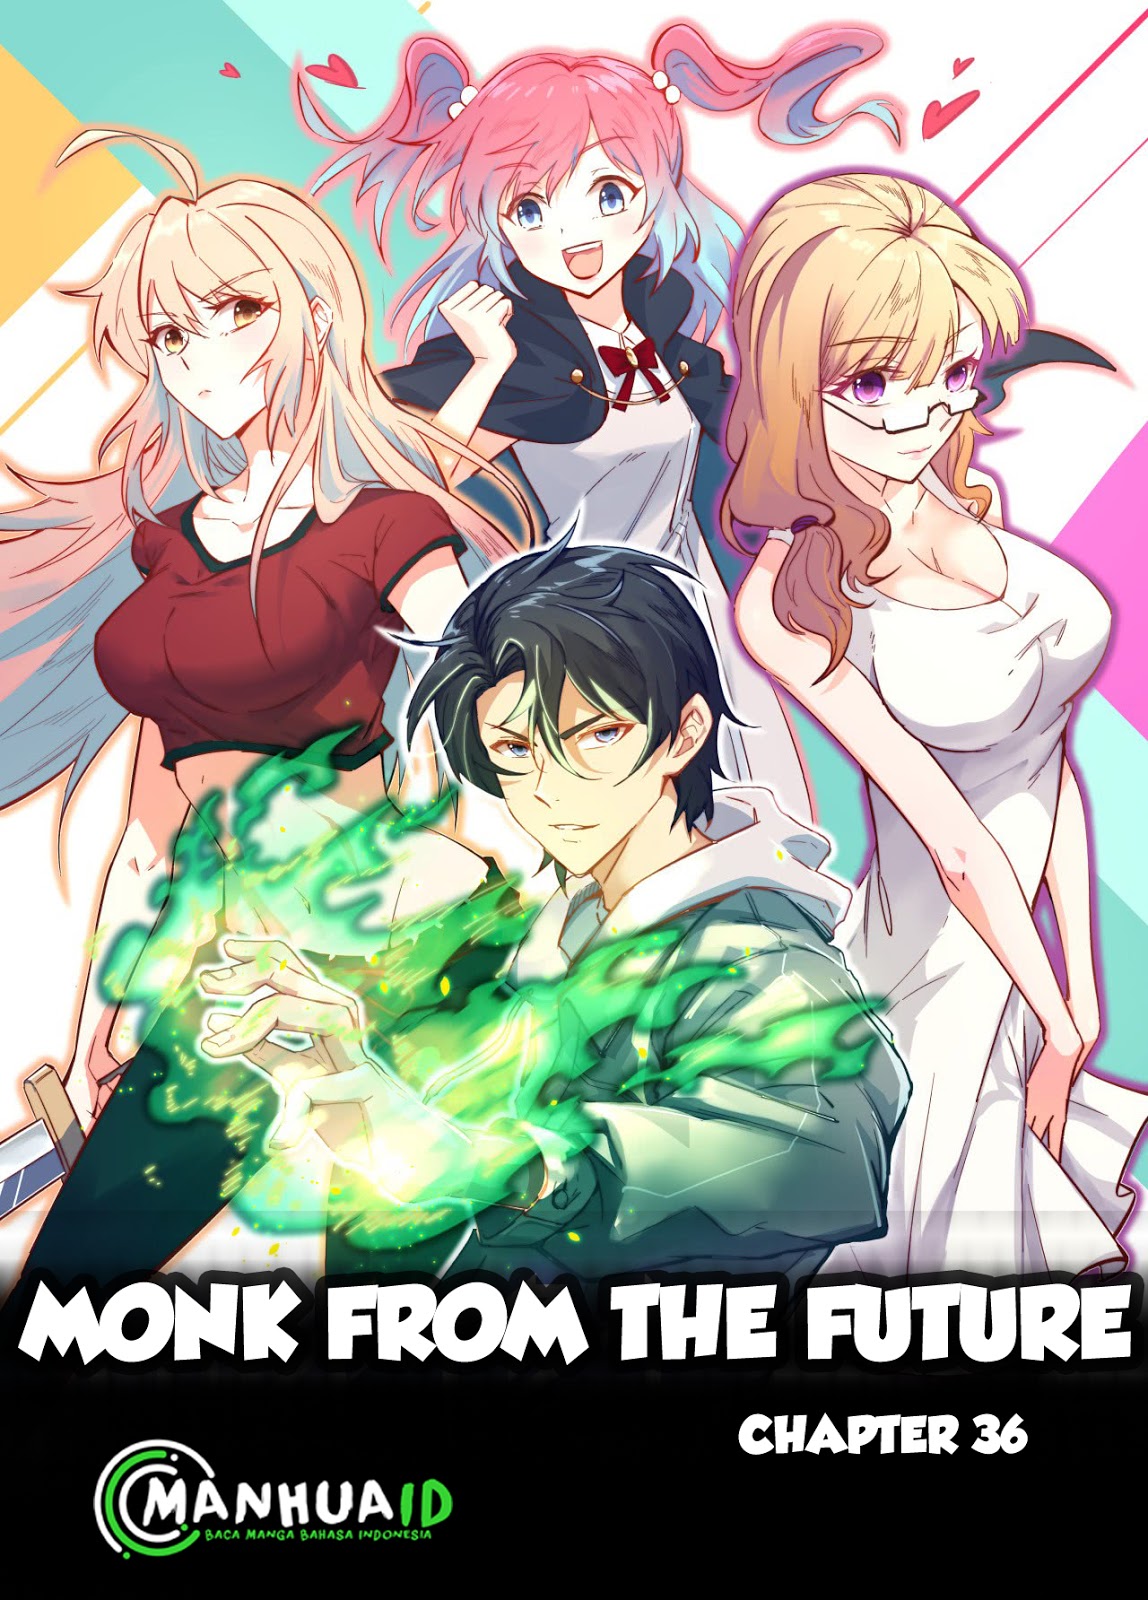 Monk From the Future Chapter 36